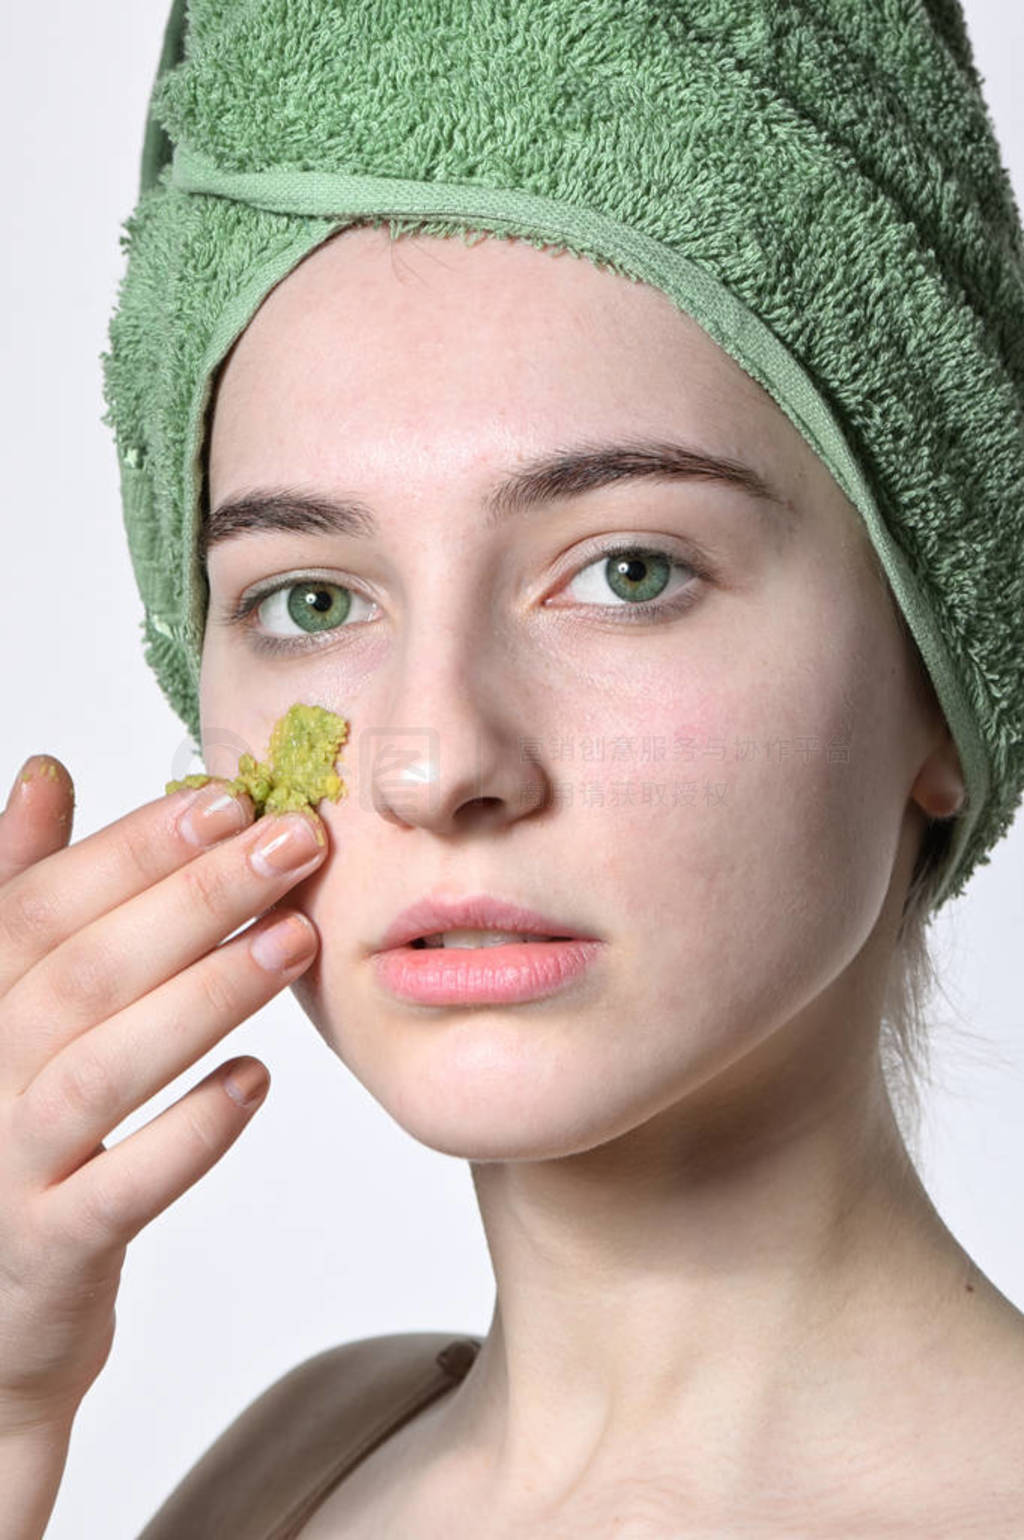 Natural Cosmetics On Woman In Facial Mask